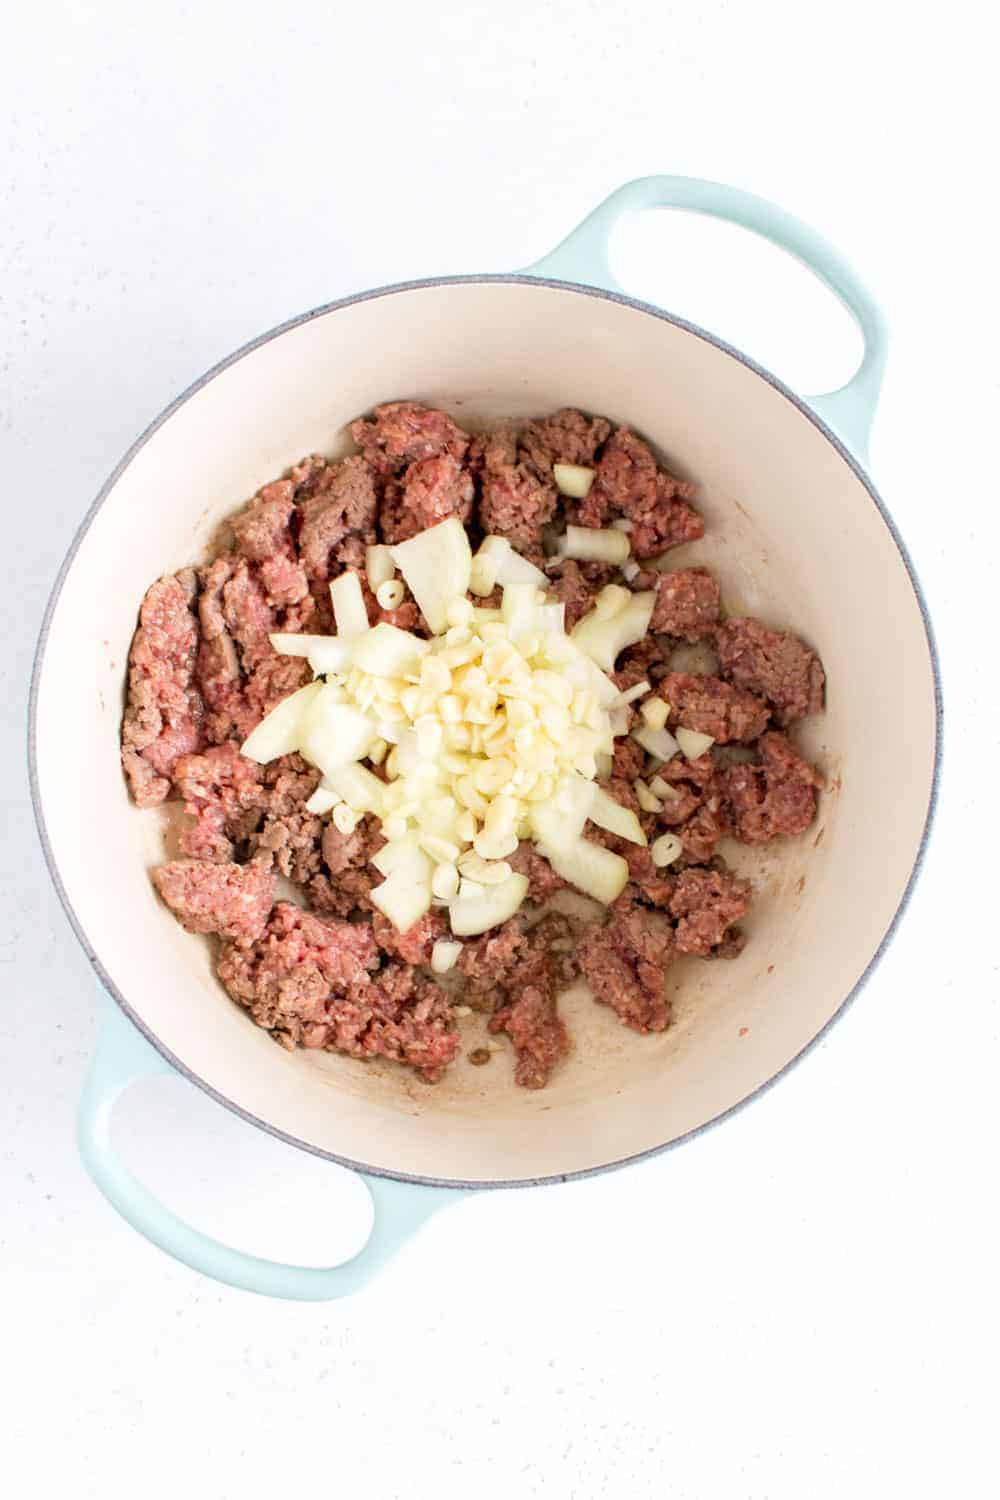 Diced onions and garlic added to ground beef in a pot.